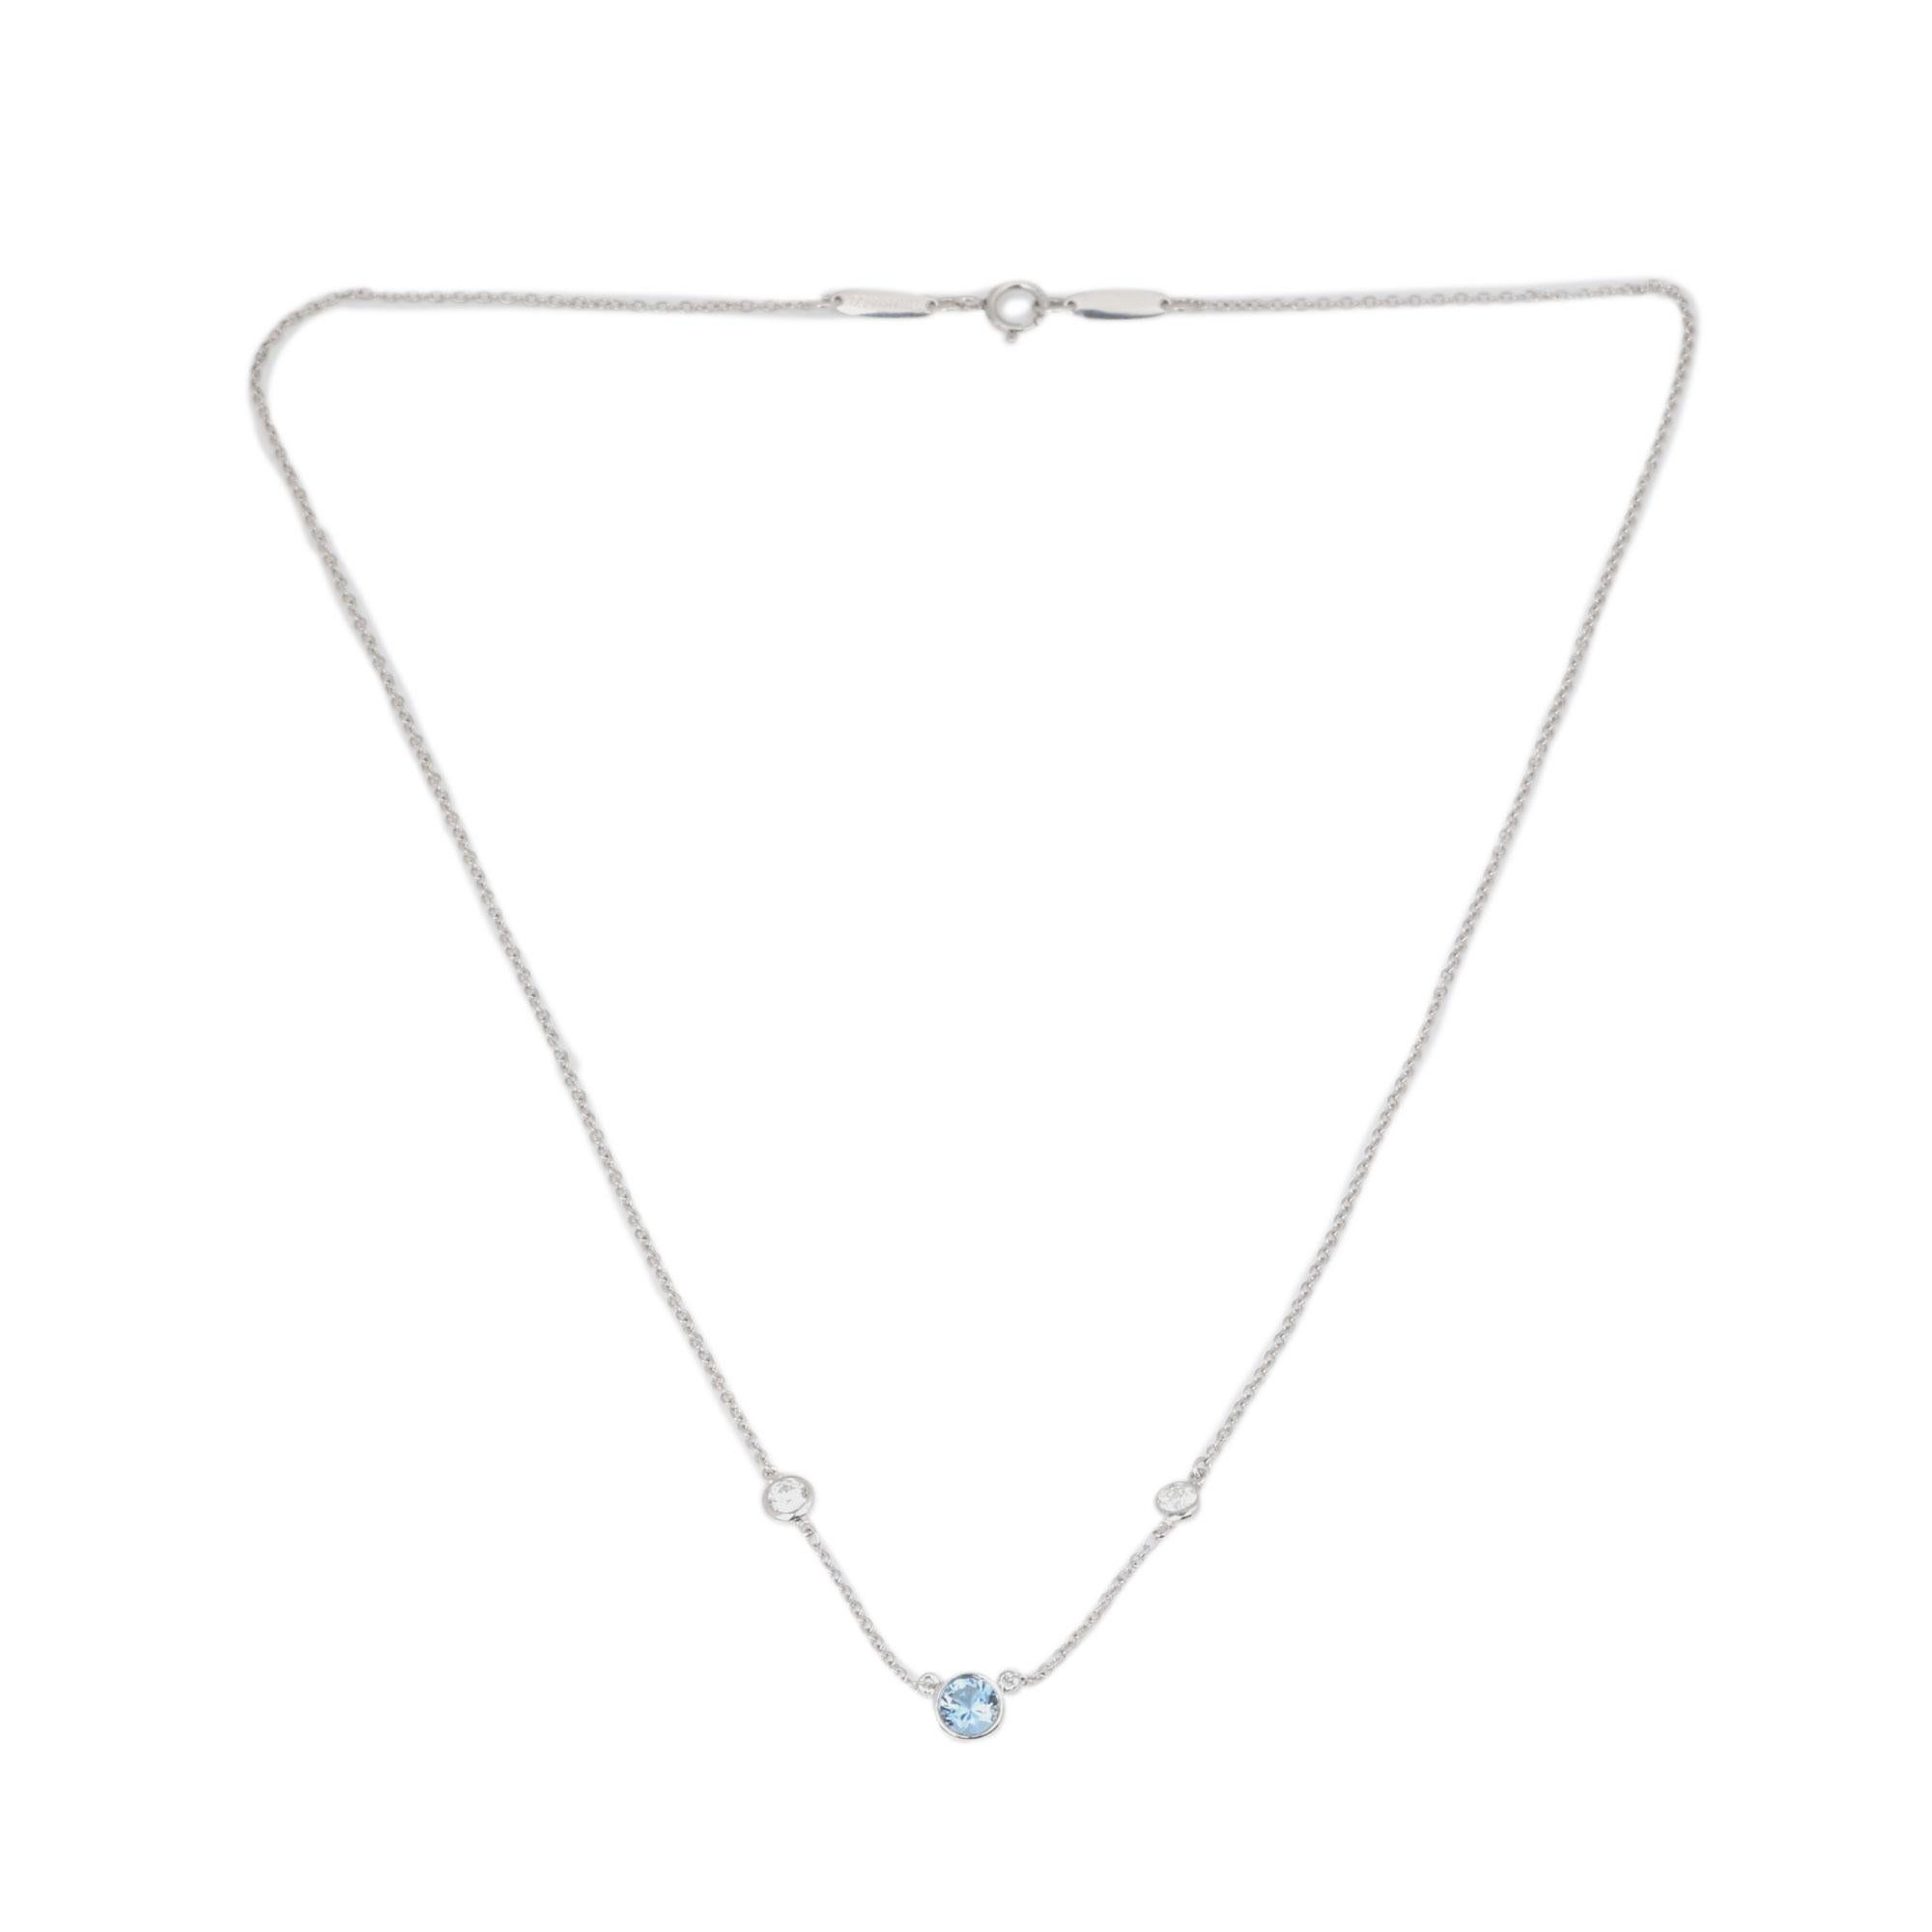 Contemporary Tiffany & Co. Colours by the Yard Aquamarine and Diamond Necklace